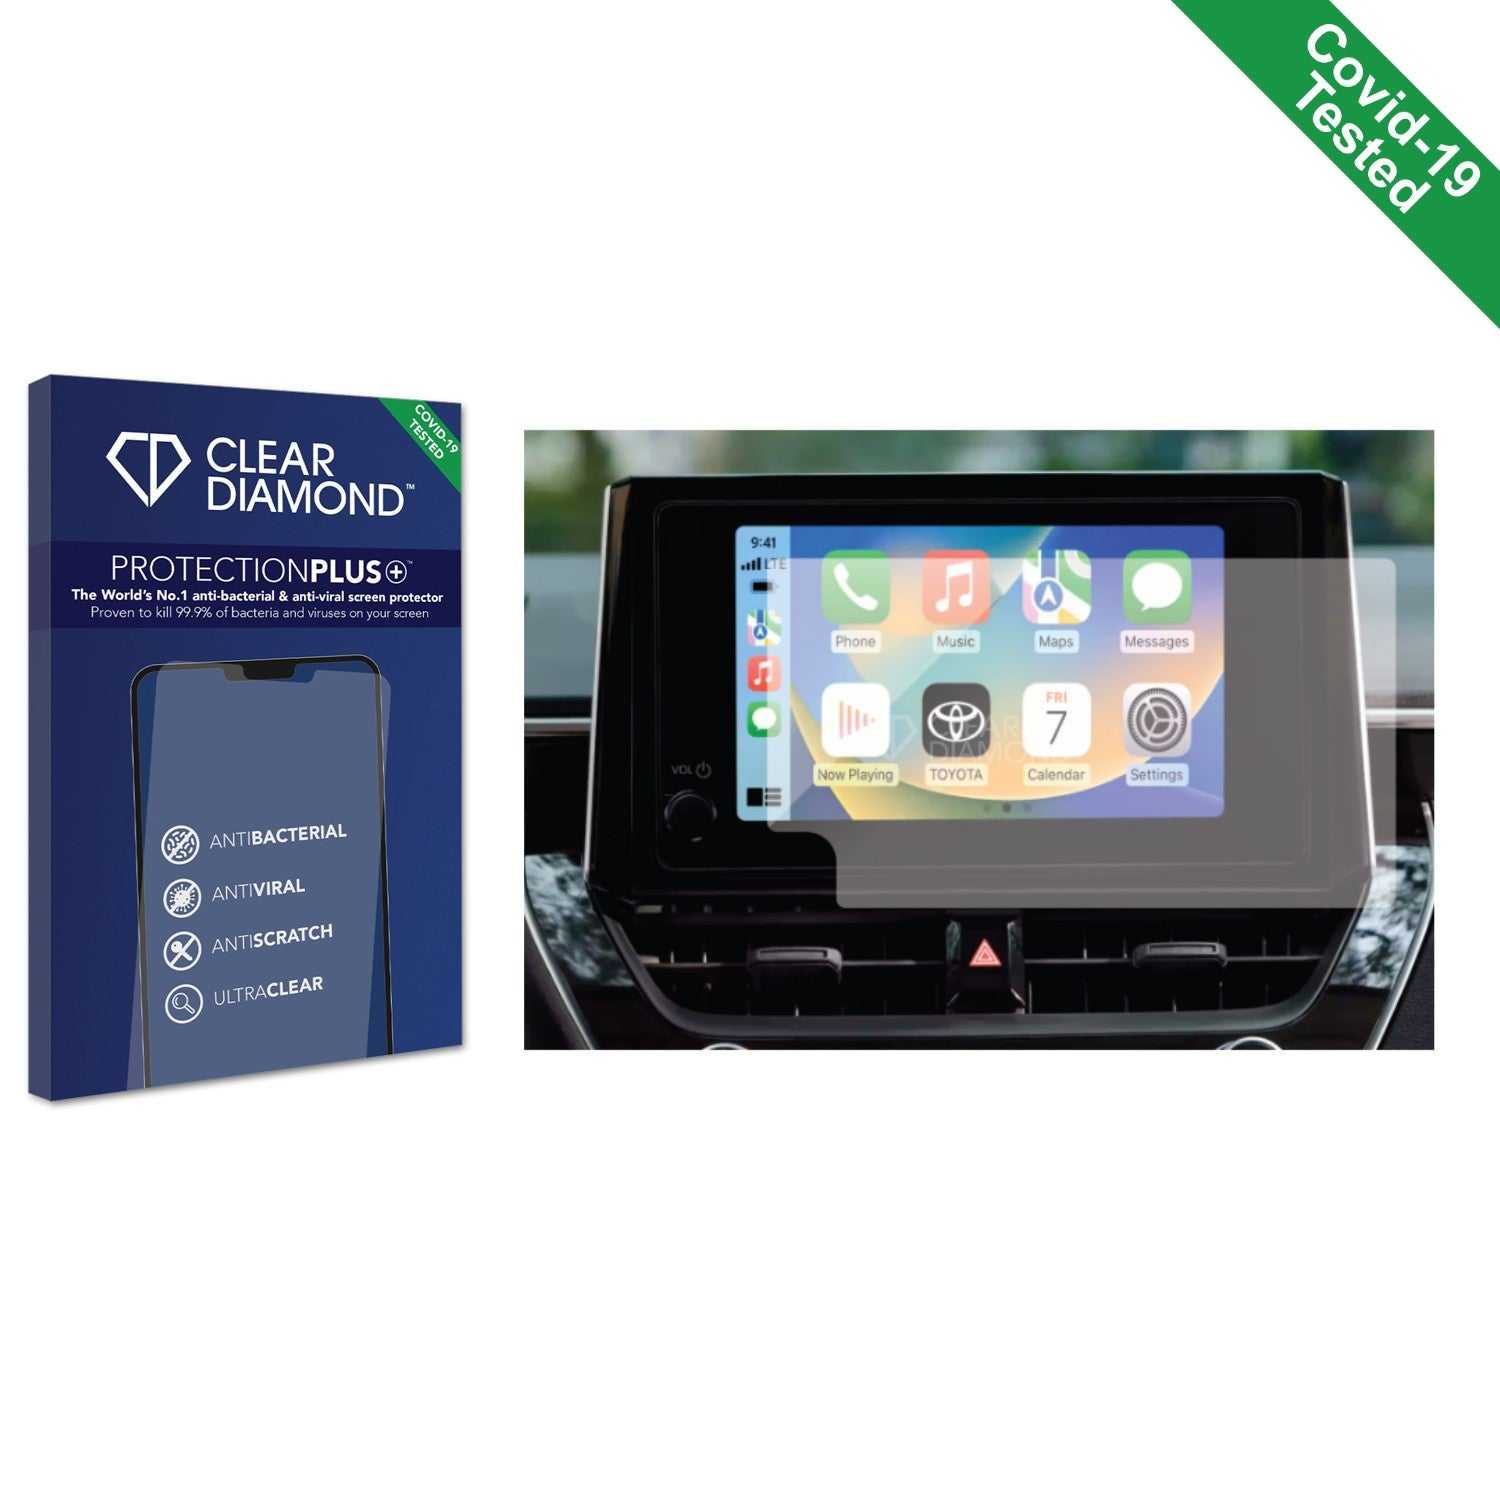 ScreenShield, Clear Diamond Anti-viral Screen Protector for Toyota Corolla 2023 8" Infotainment System